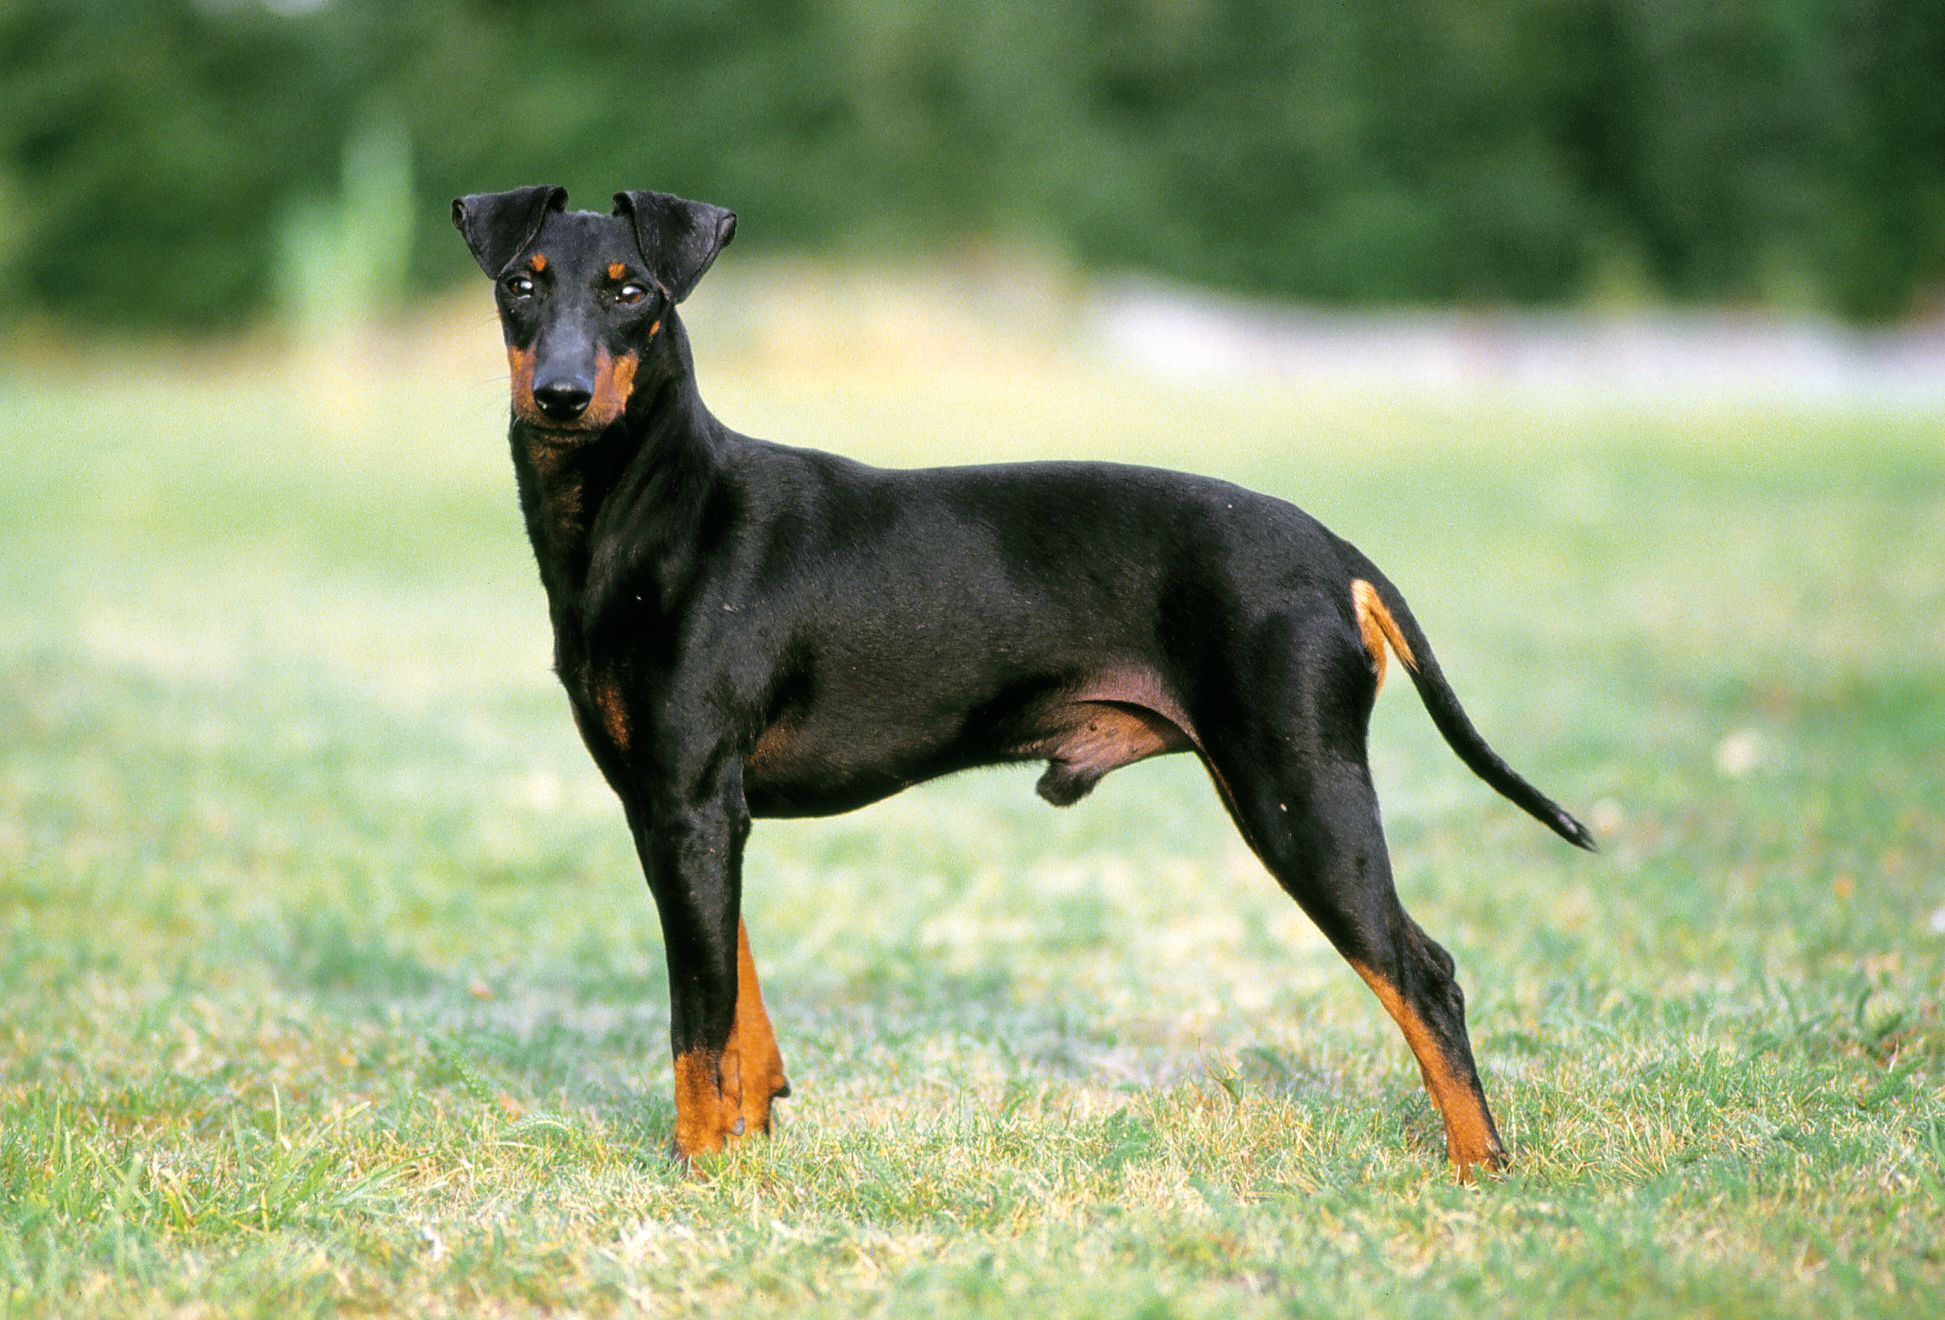 Side view of Manchester Terrier standing on grass looking at camera